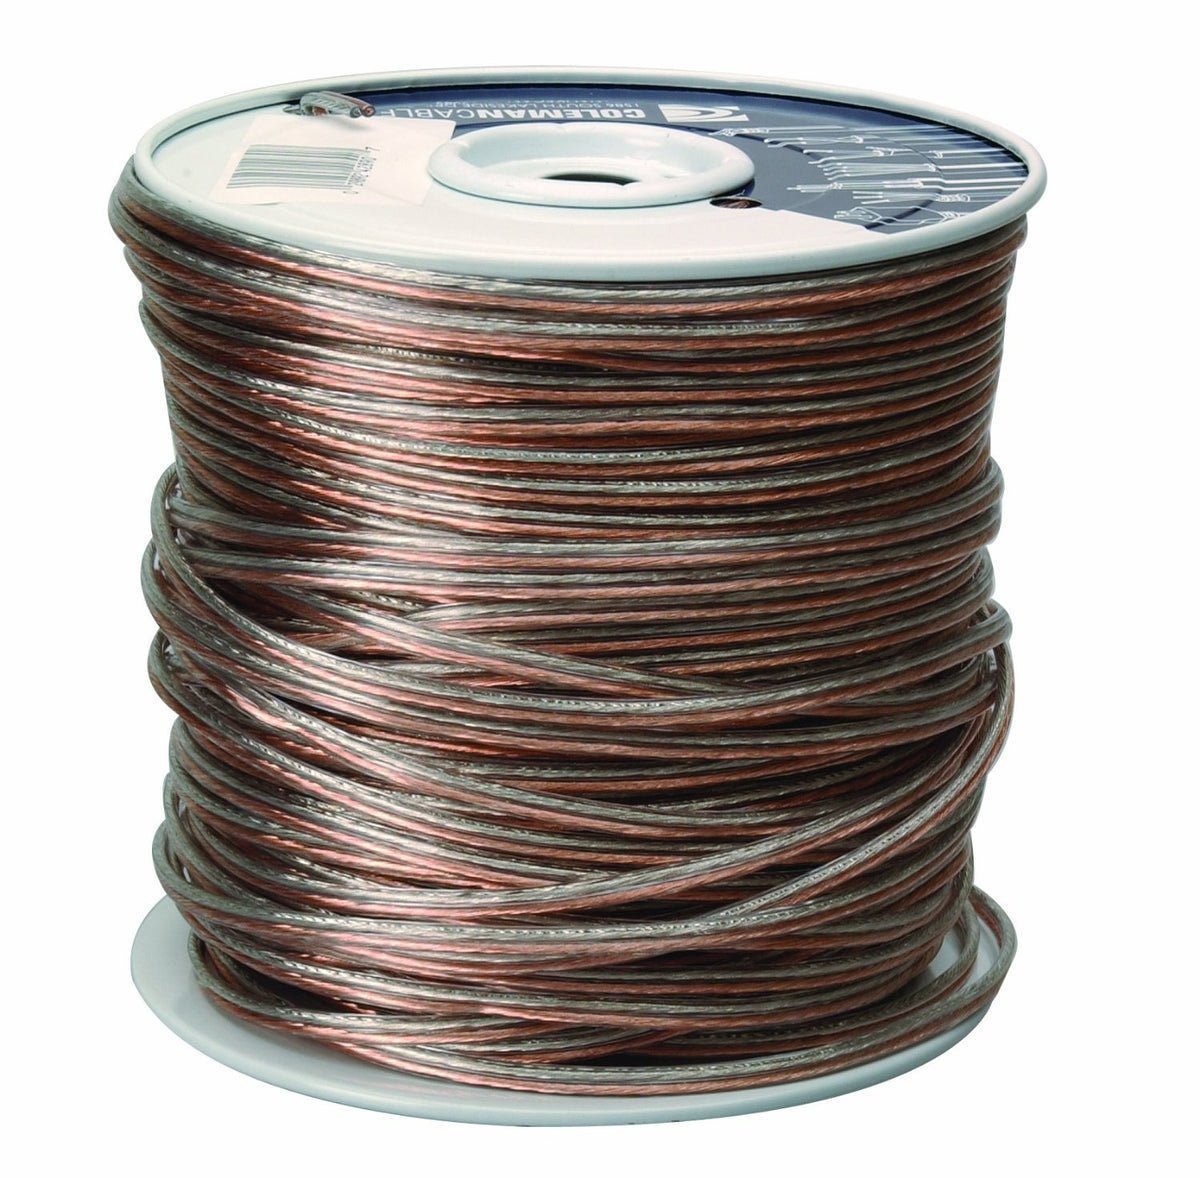 buy electrical wire at cheap rate in bulk. wholesale & retail home electrical goods store. home décor ideas, maintenance, repair replacement parts